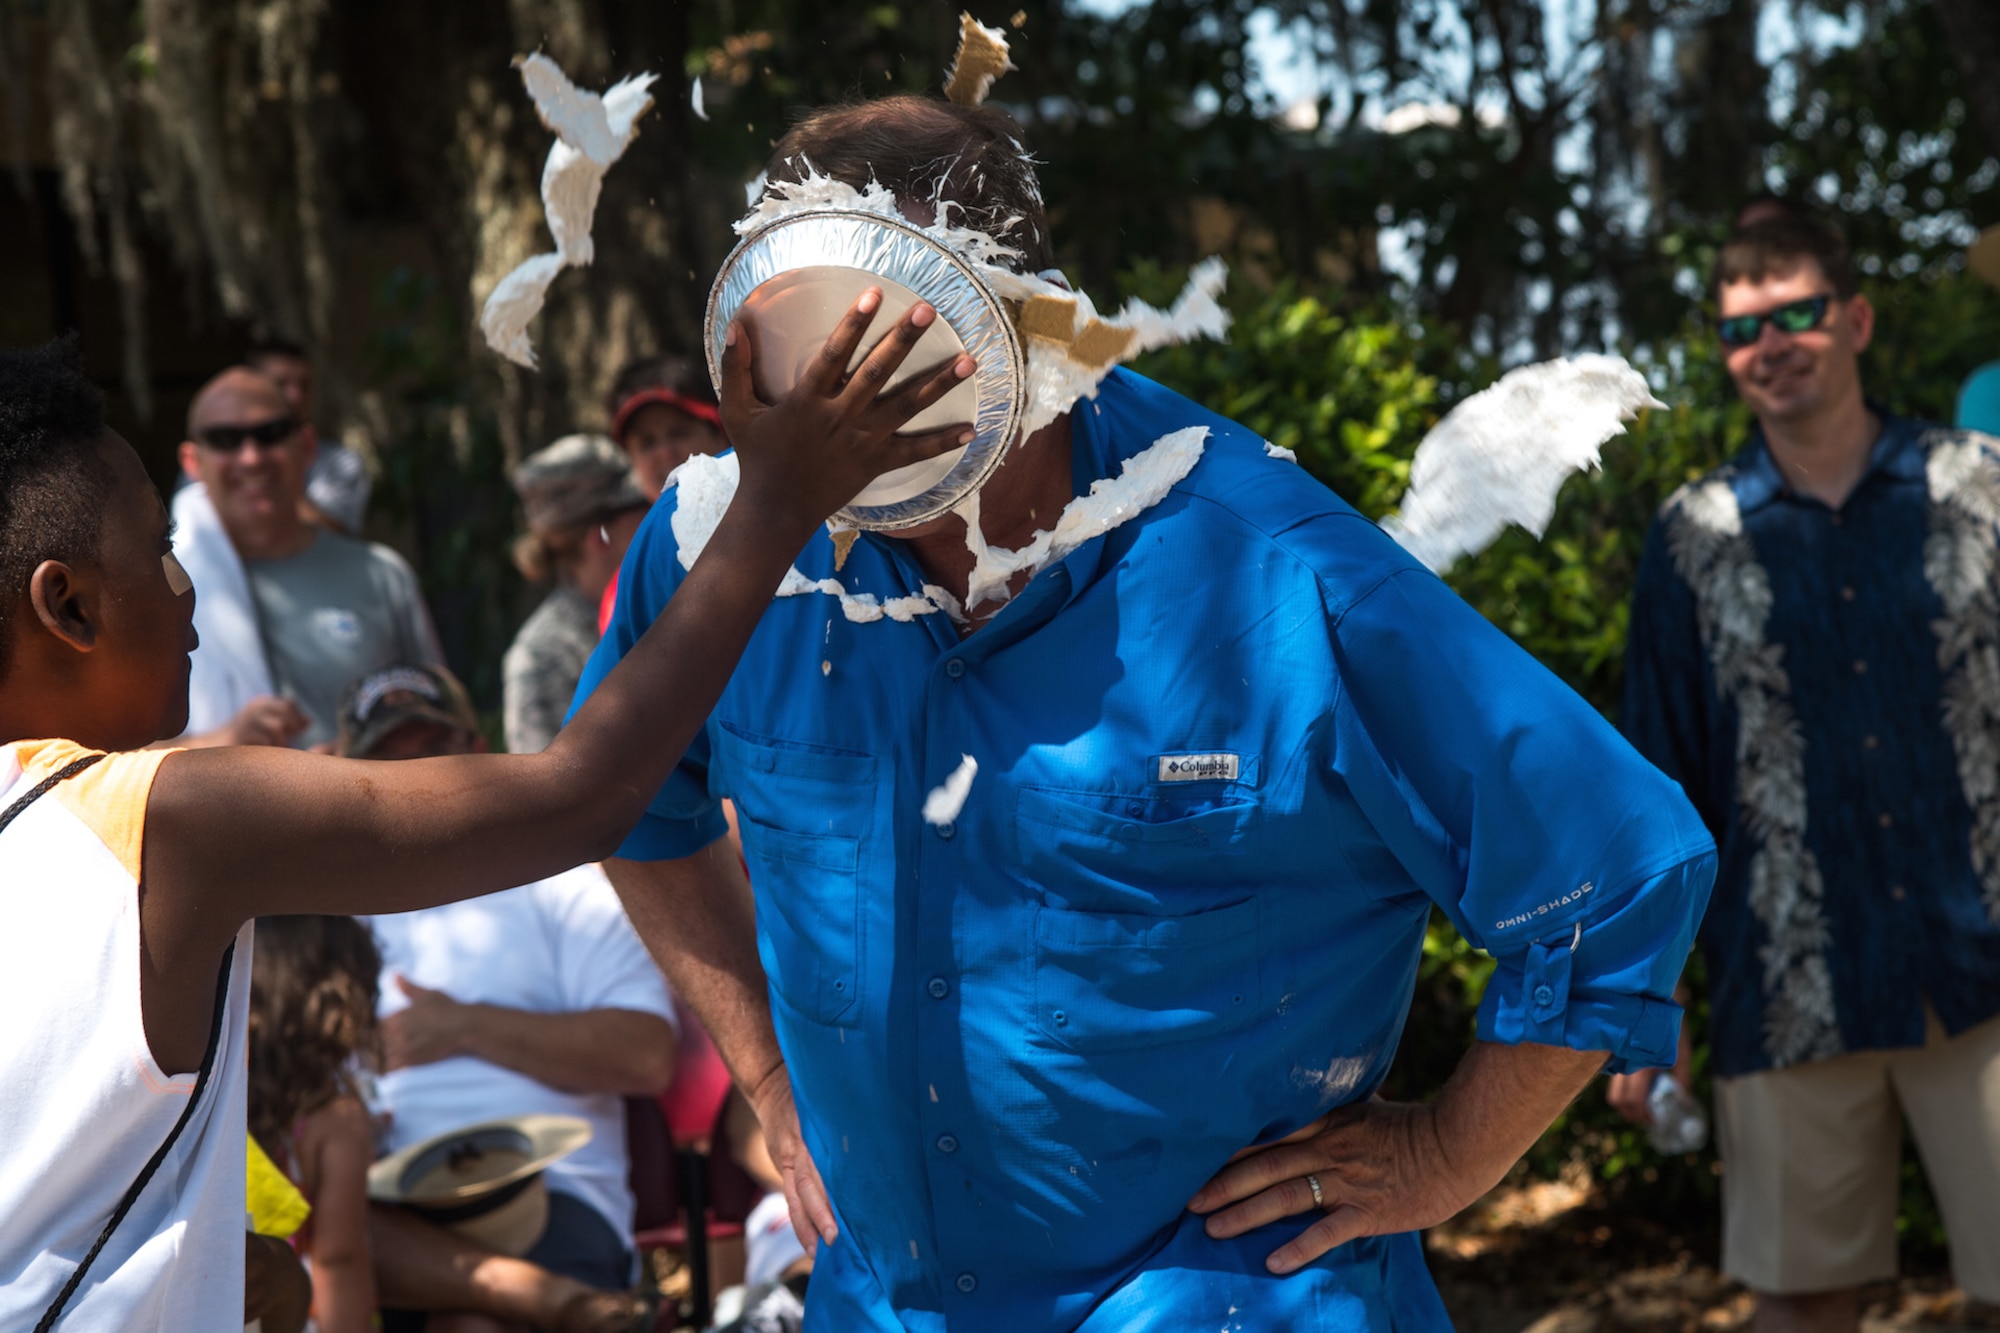 A 403rd Wing member receives a pie in the face during the Wing Spring Fling at Keesler Air Force Base, Mississippi, May 15, 2016. The "pie-in-the-face" and Wing Spring Fling was hosted by the 403rd Human Resource Development Council to allow leadership, Citizen Airmen, and their families a chance to interact and build camaraderie outside the work place. (U.S. Air Force photo/Staff Sgt. Shelton Sherrill)